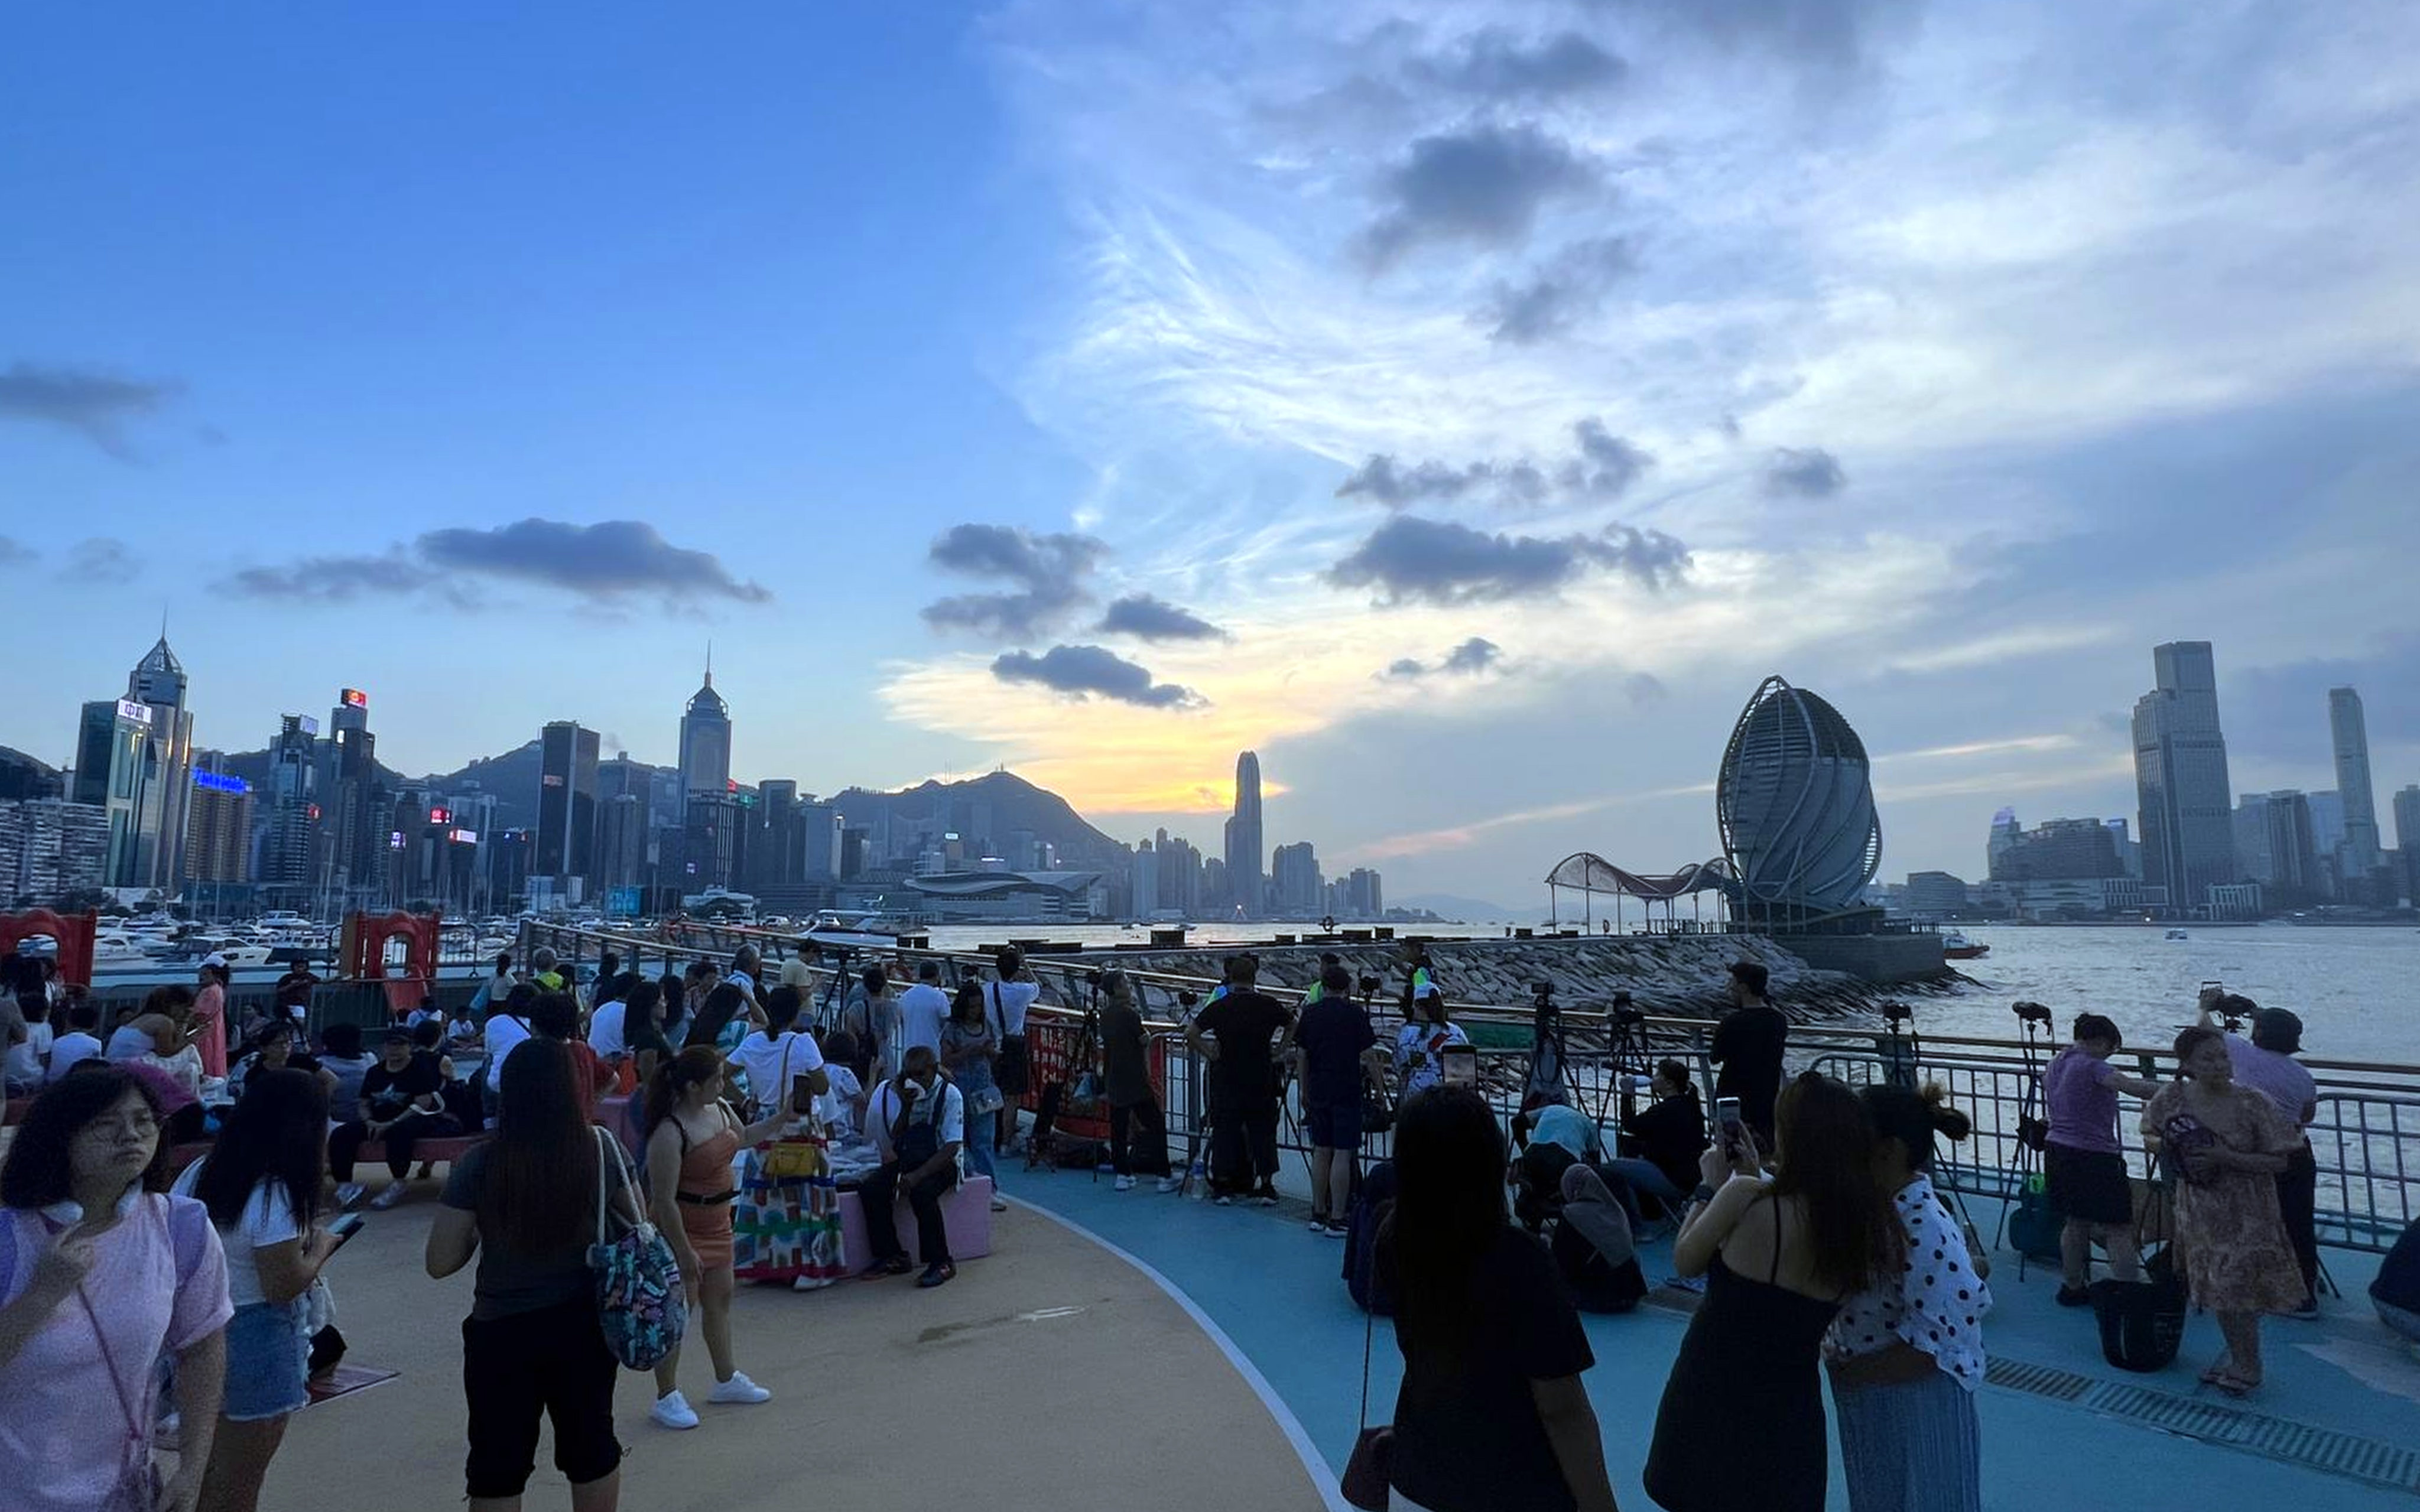 Revellers have camped out early to watch the National Day fireworks display. Photo: Sam Tsang